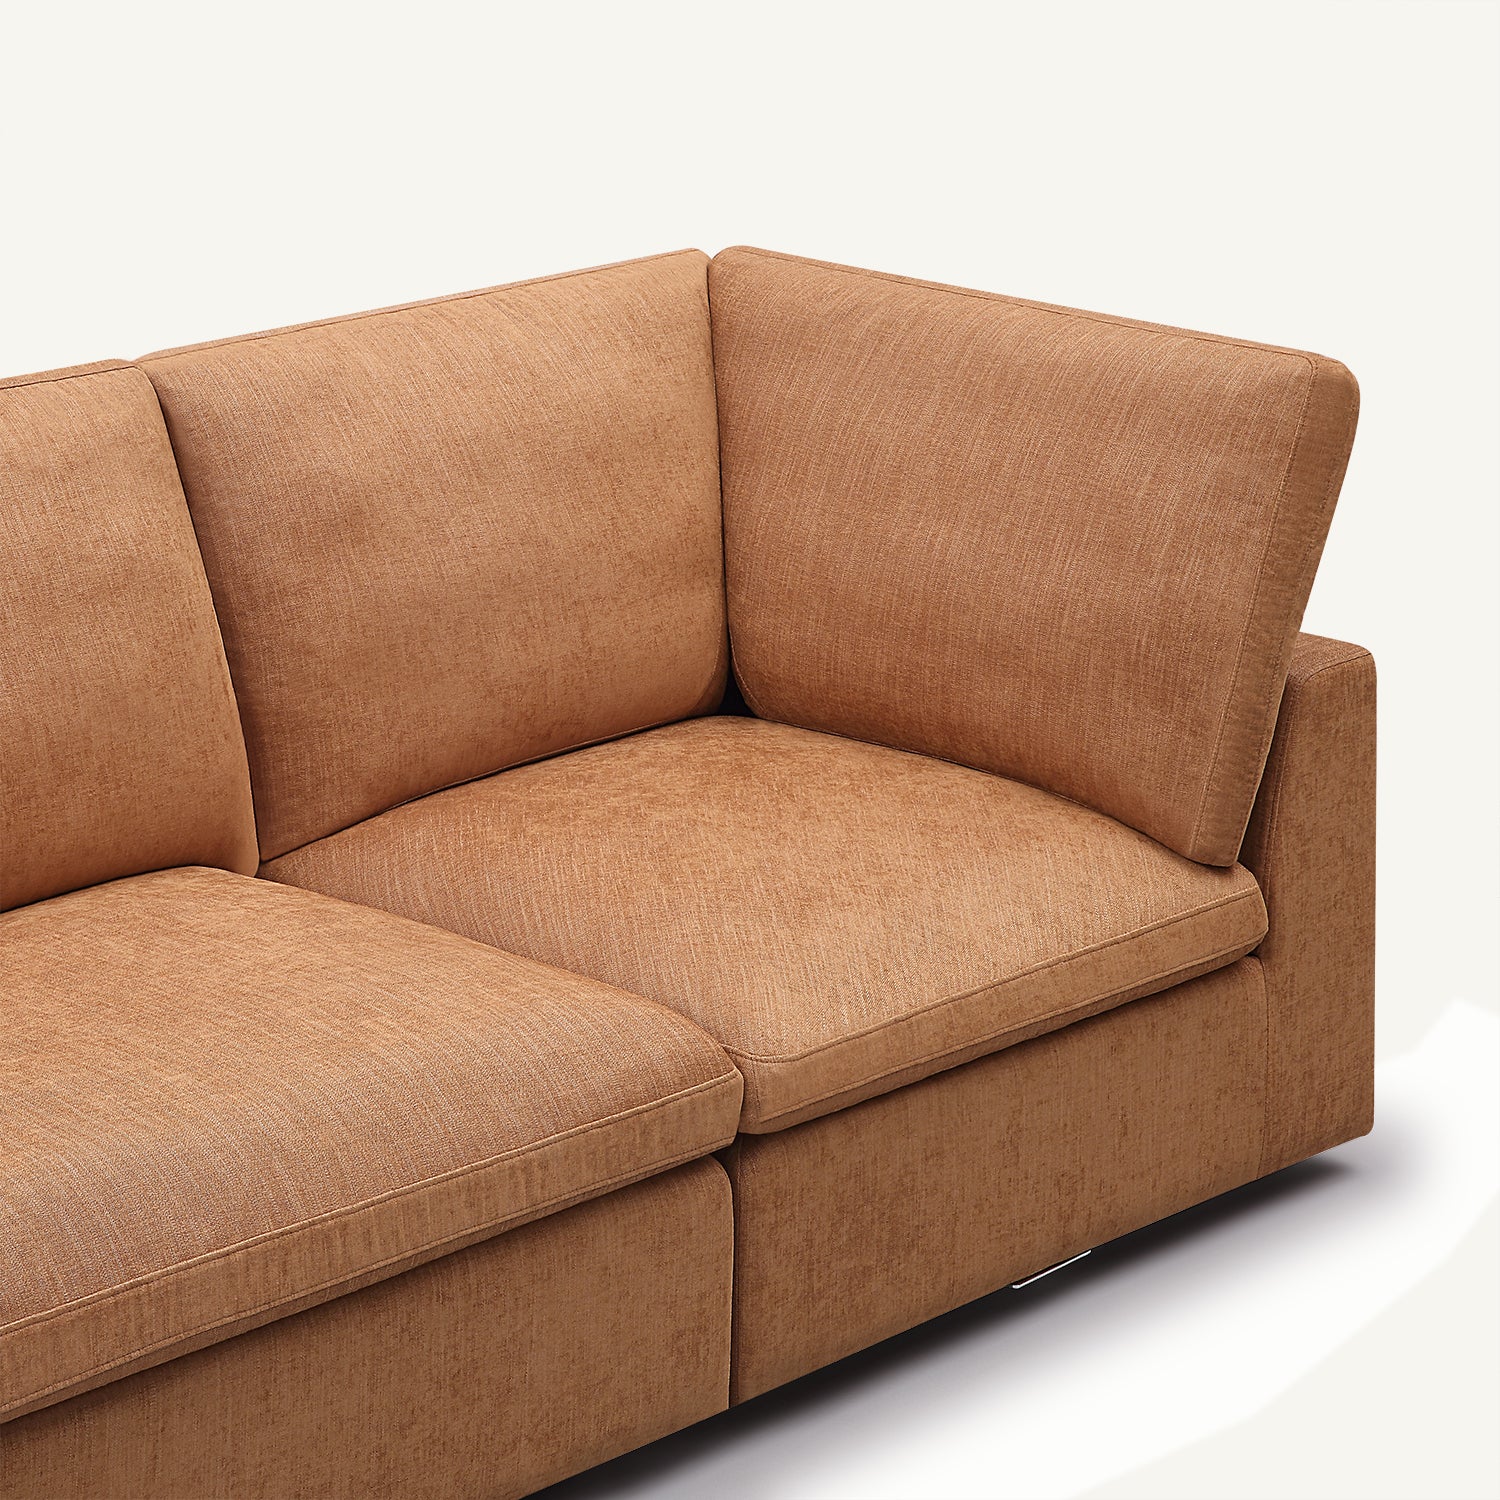 Cloud Tan Linen 5-Seat Sofa with Double Ottomans